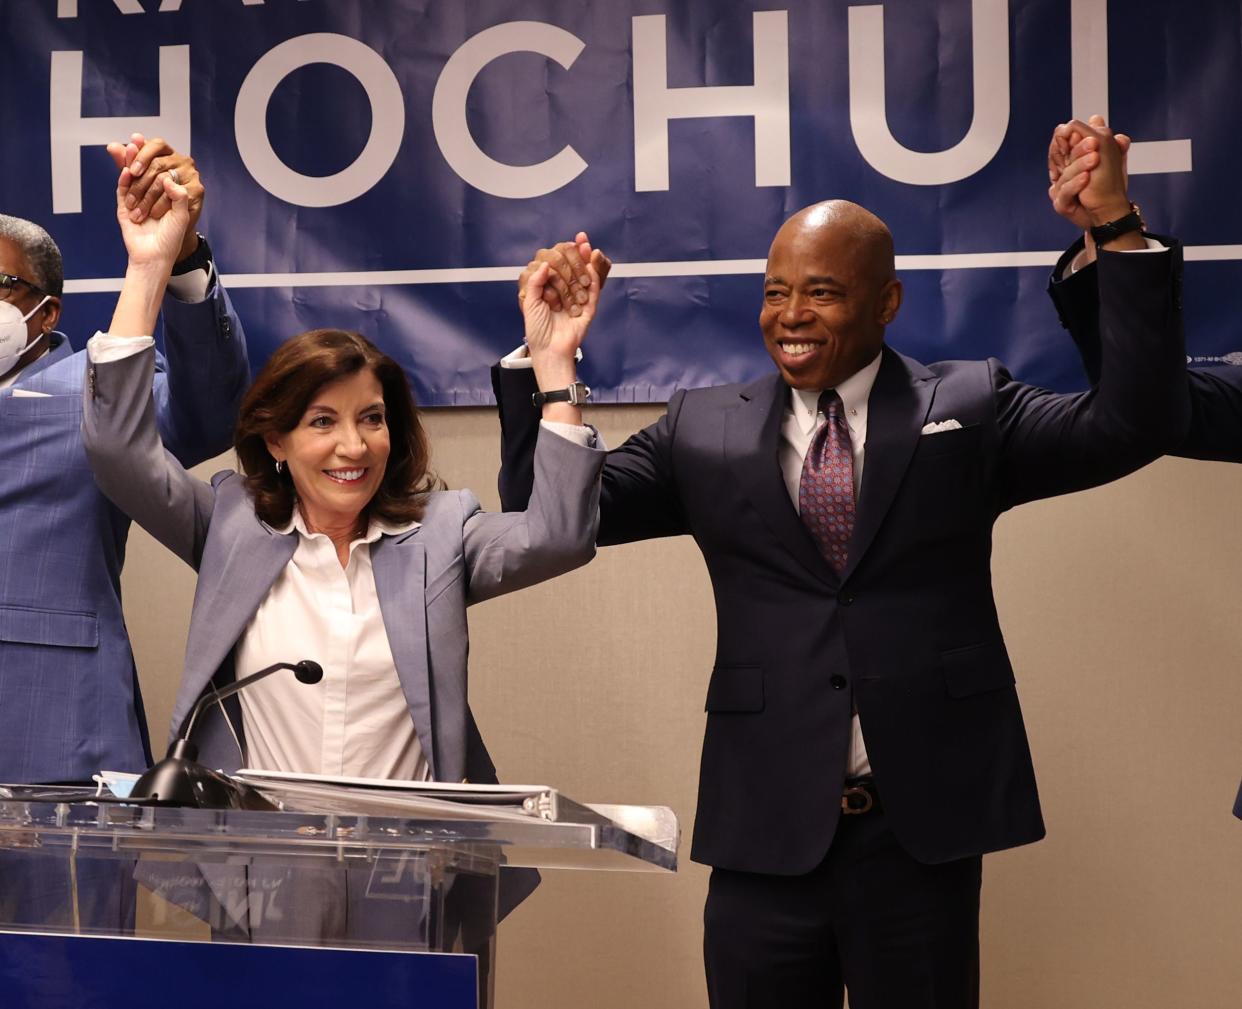 New York Governor Kathy Hochul (left) is pictured at the podium after receiving an endorsement from New York City Mayor Eric Adams (right).